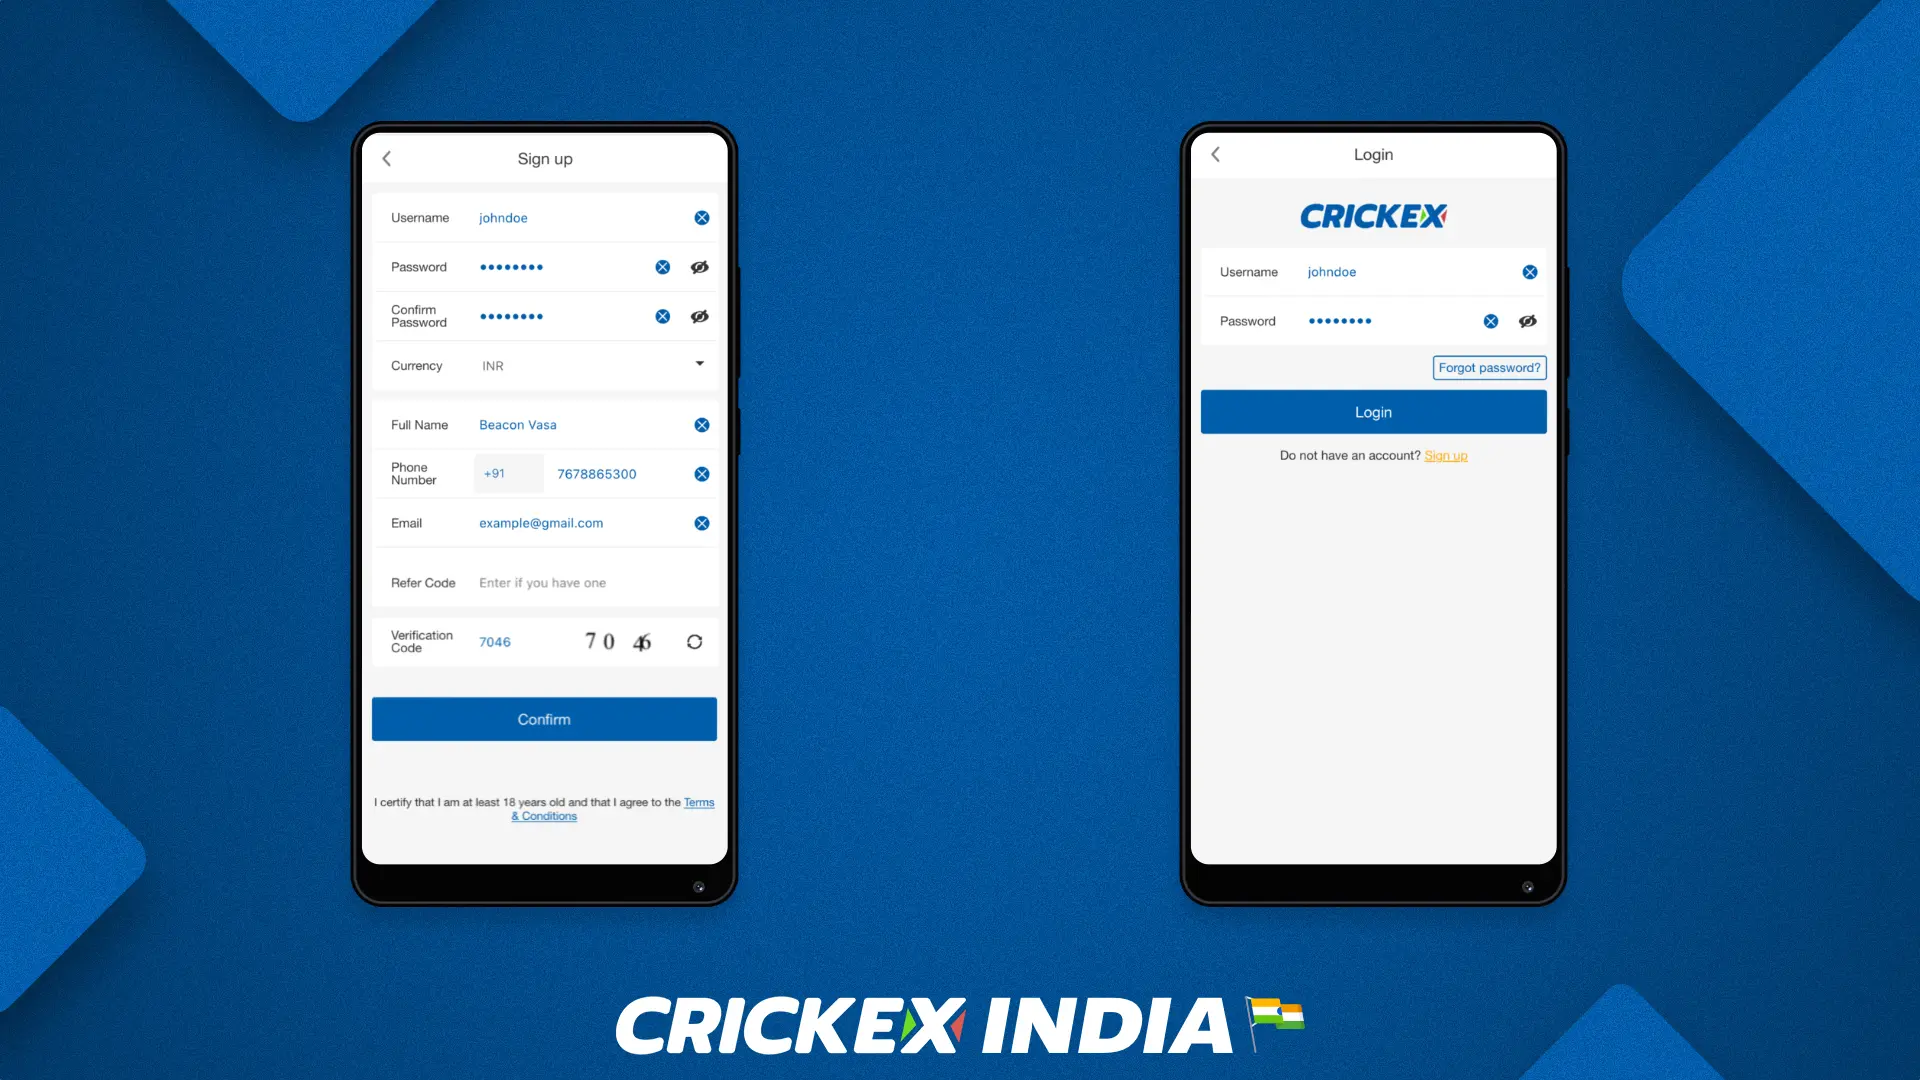 Create an account to get access to all the features of the Crickex app